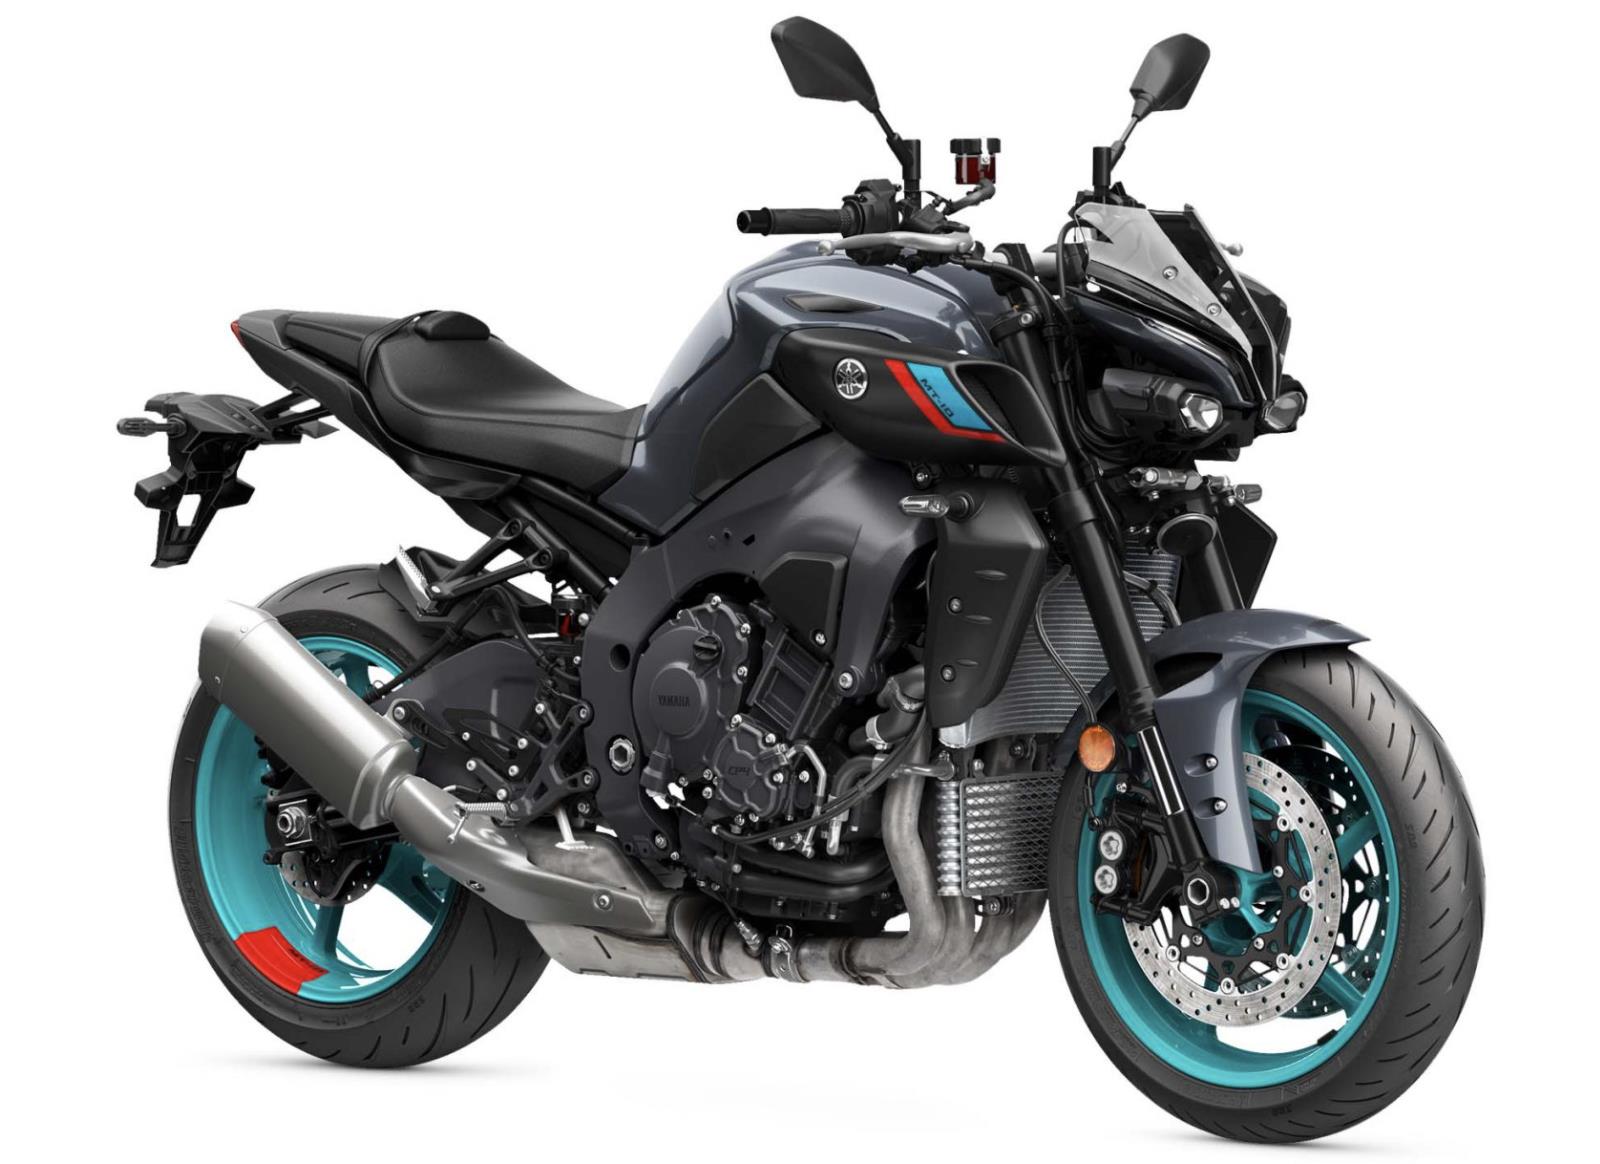 2022 Yamaha MT10 Price in India, Launch, Engine, Features, and